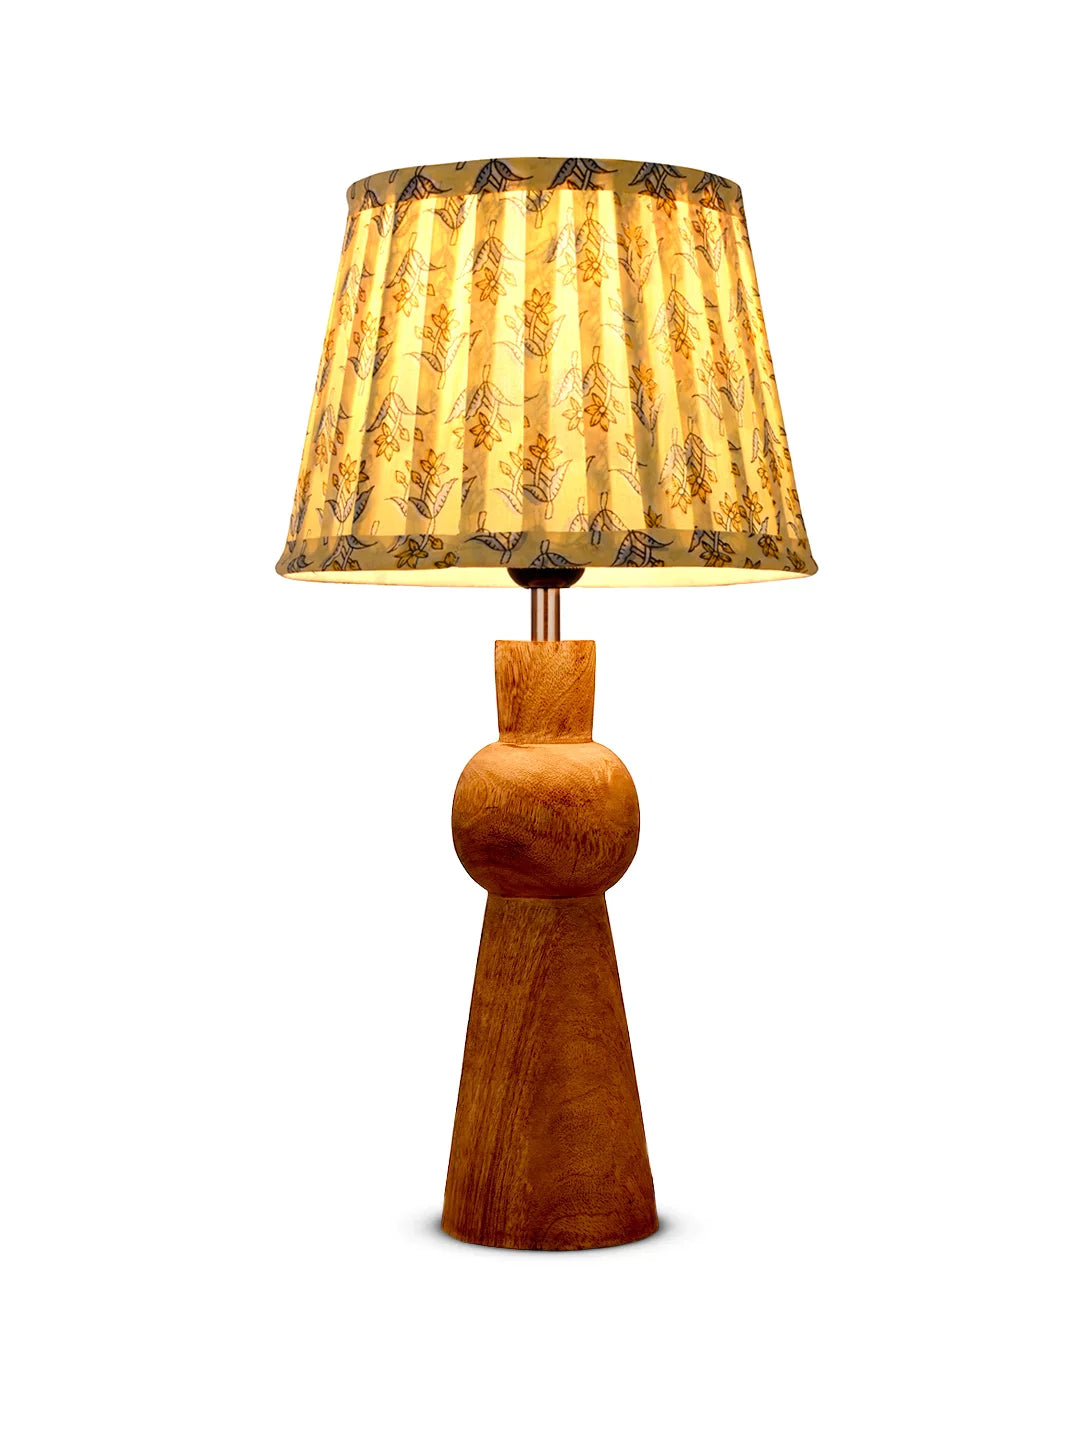 Wooden Skirt Table Lamp with Pleeted Colorful Lemon Taper Shade